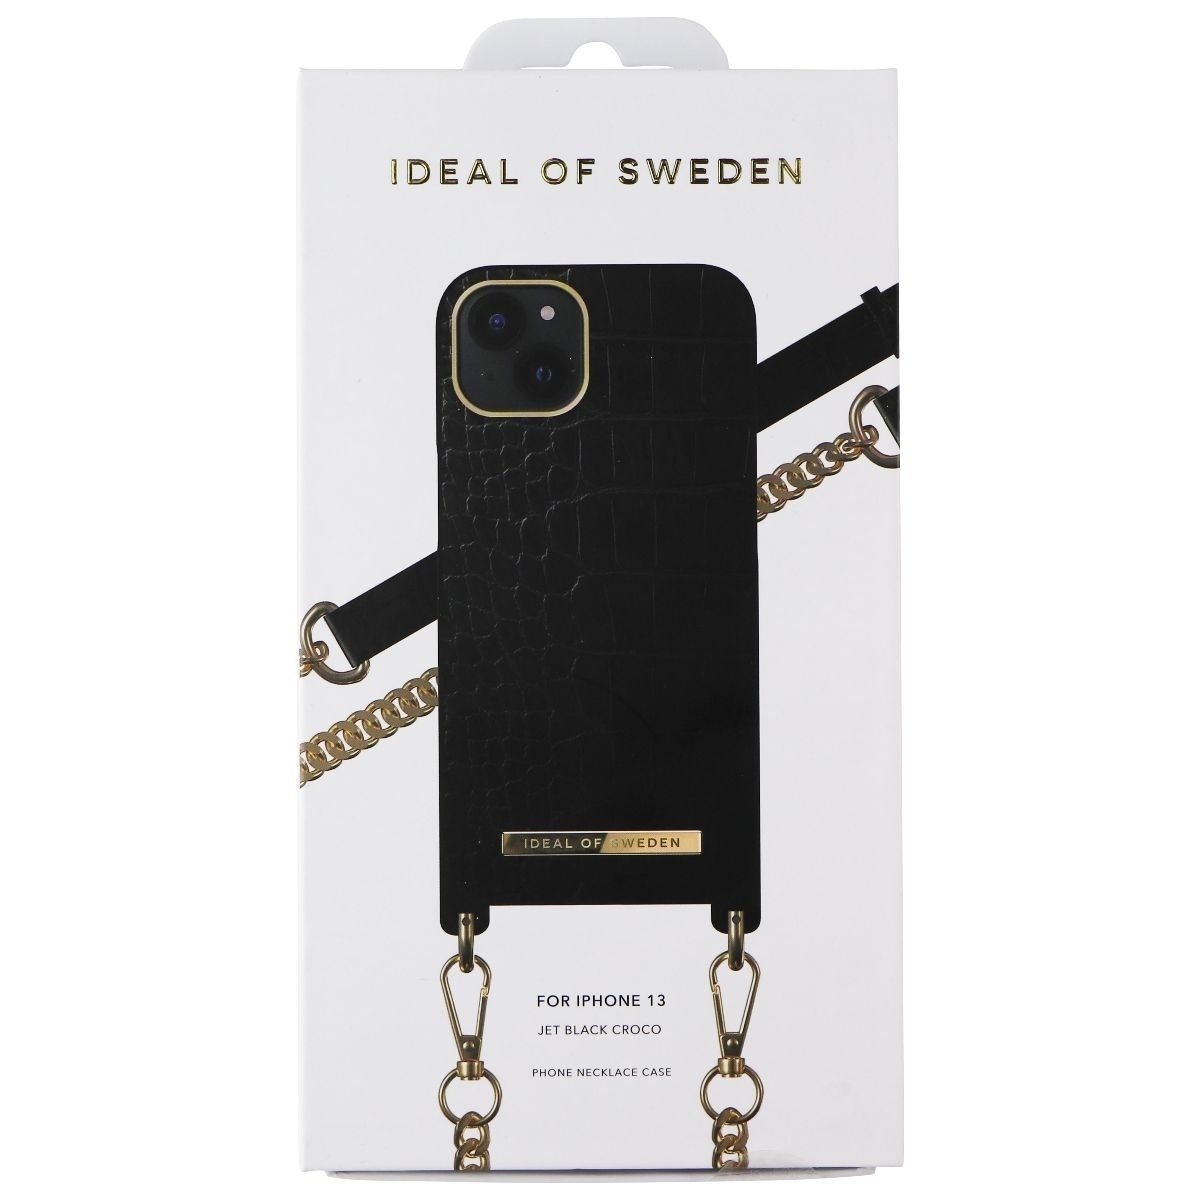 IDeal Of Sweden Phone Necklace Case For Apple IPhone 13 - Jet Black Croco